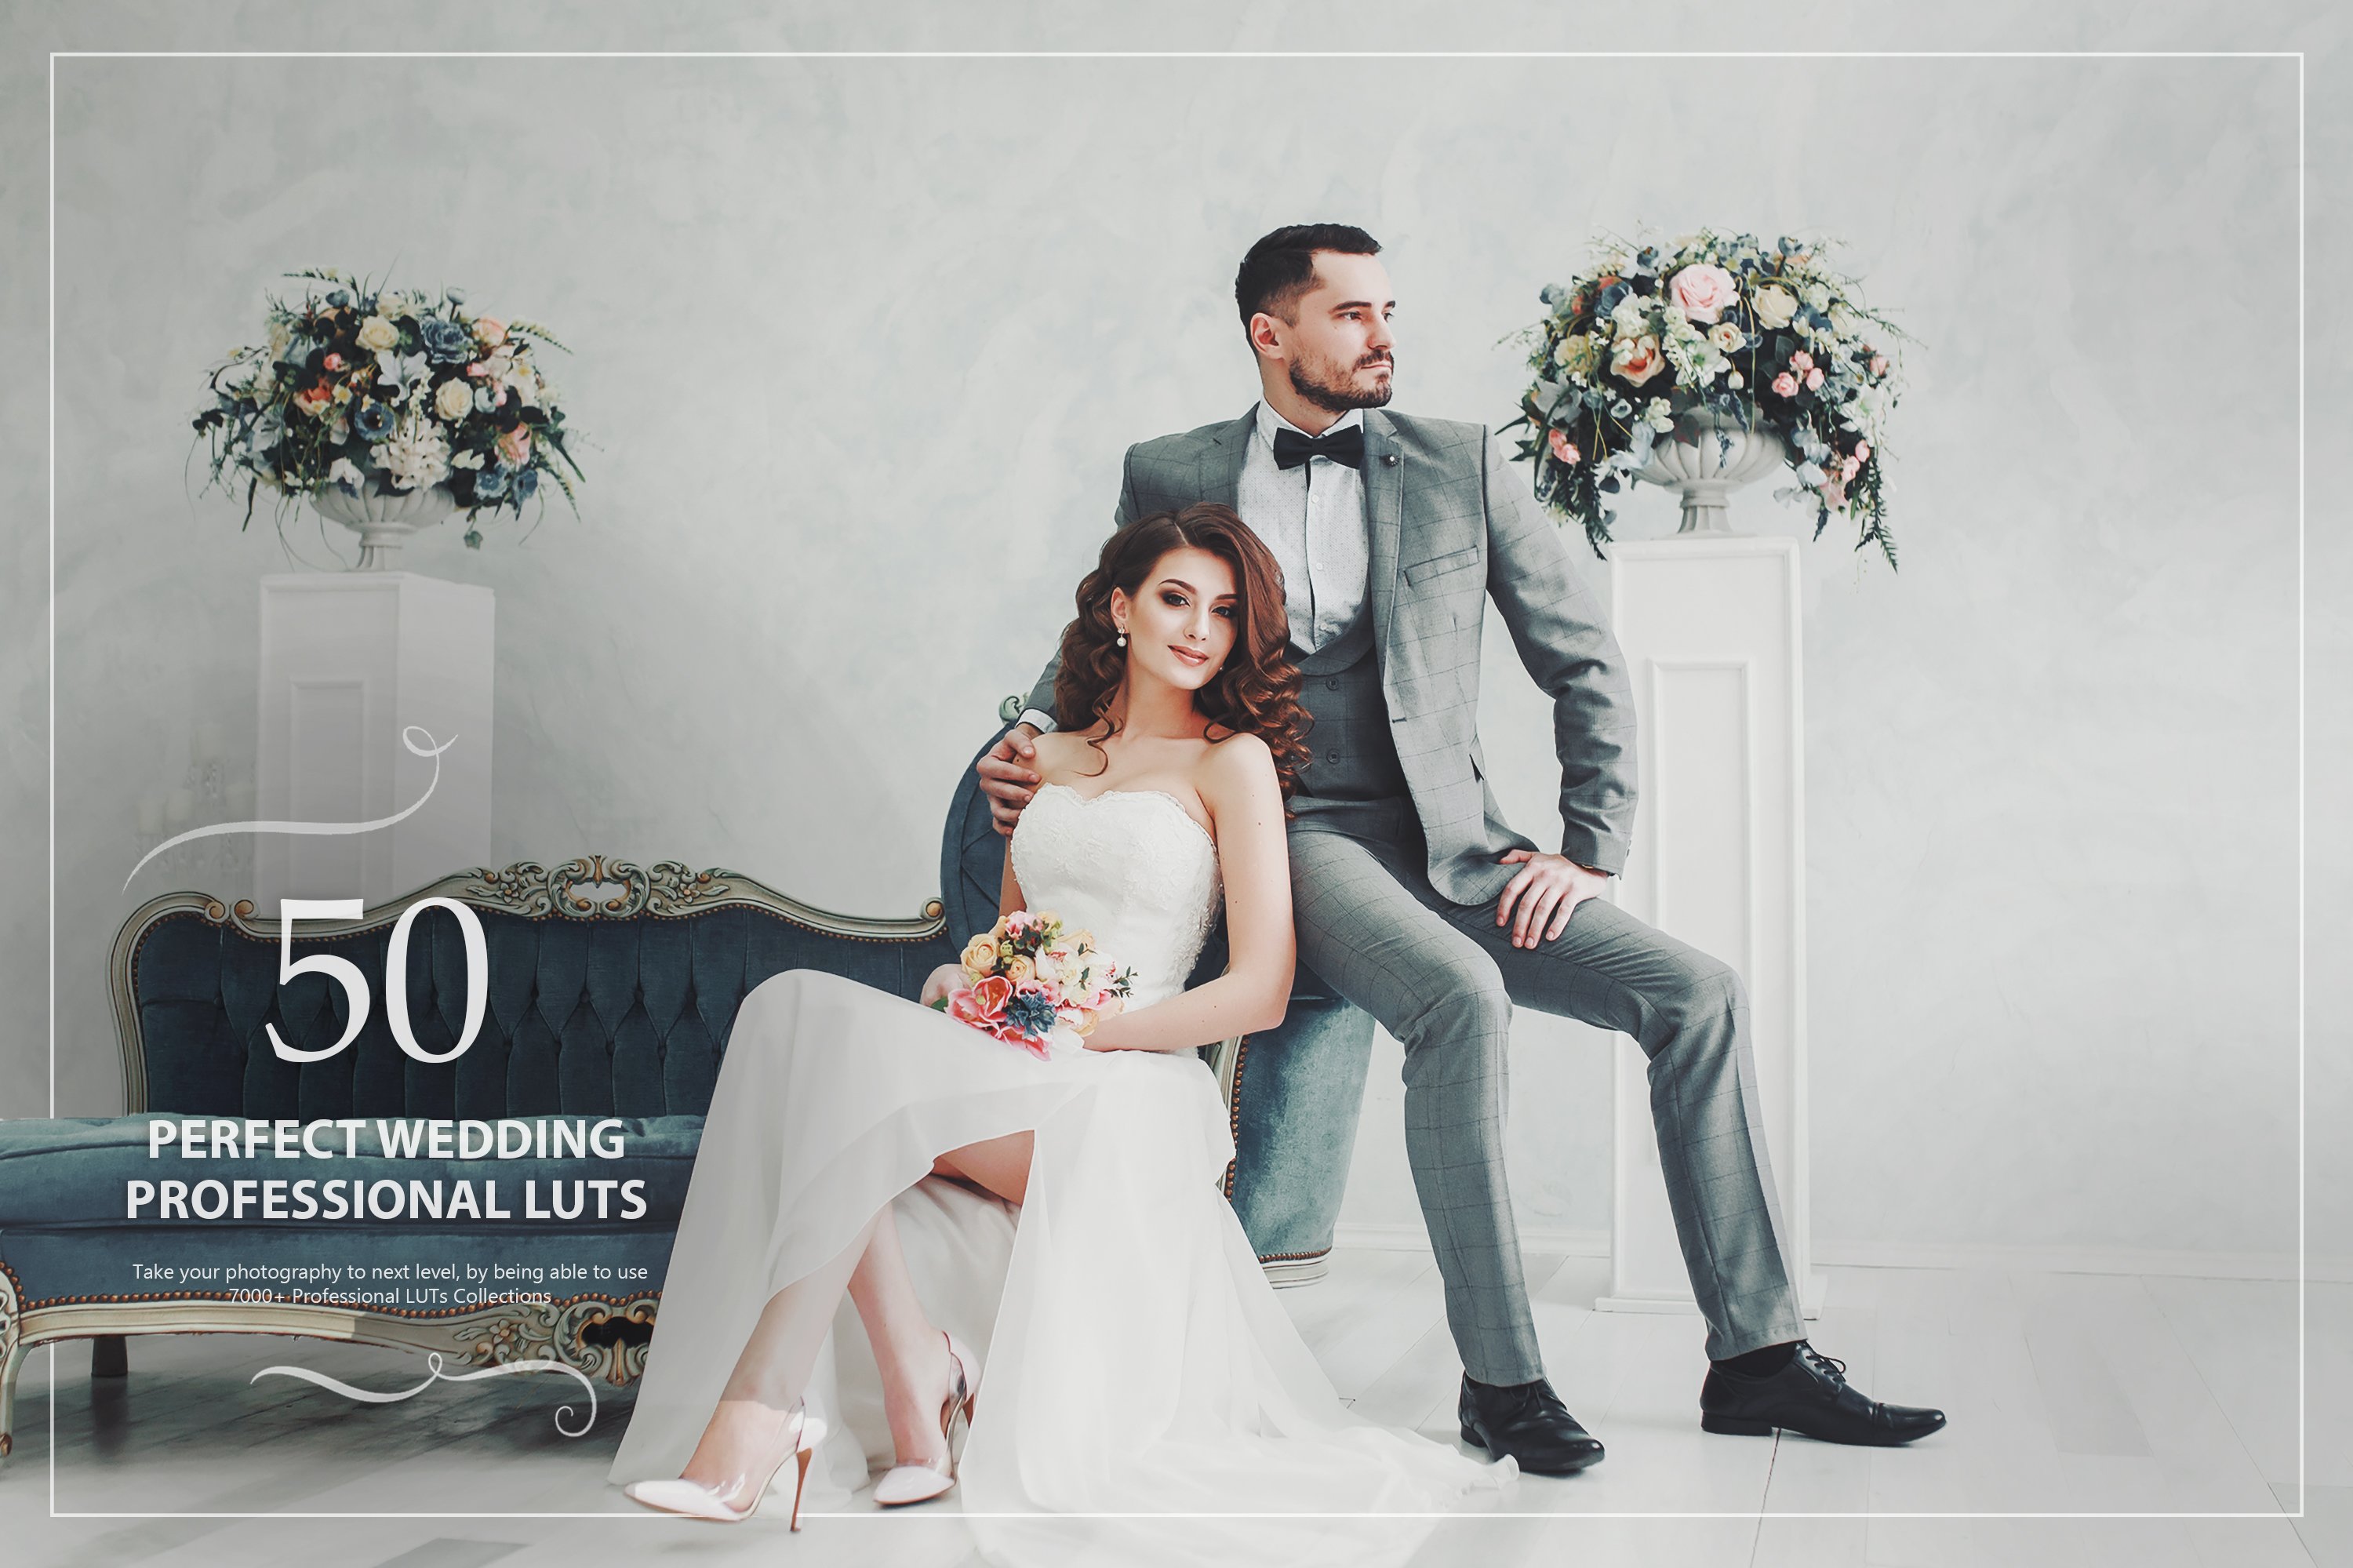 50 Perfect Wedding LUTs Packcover image.